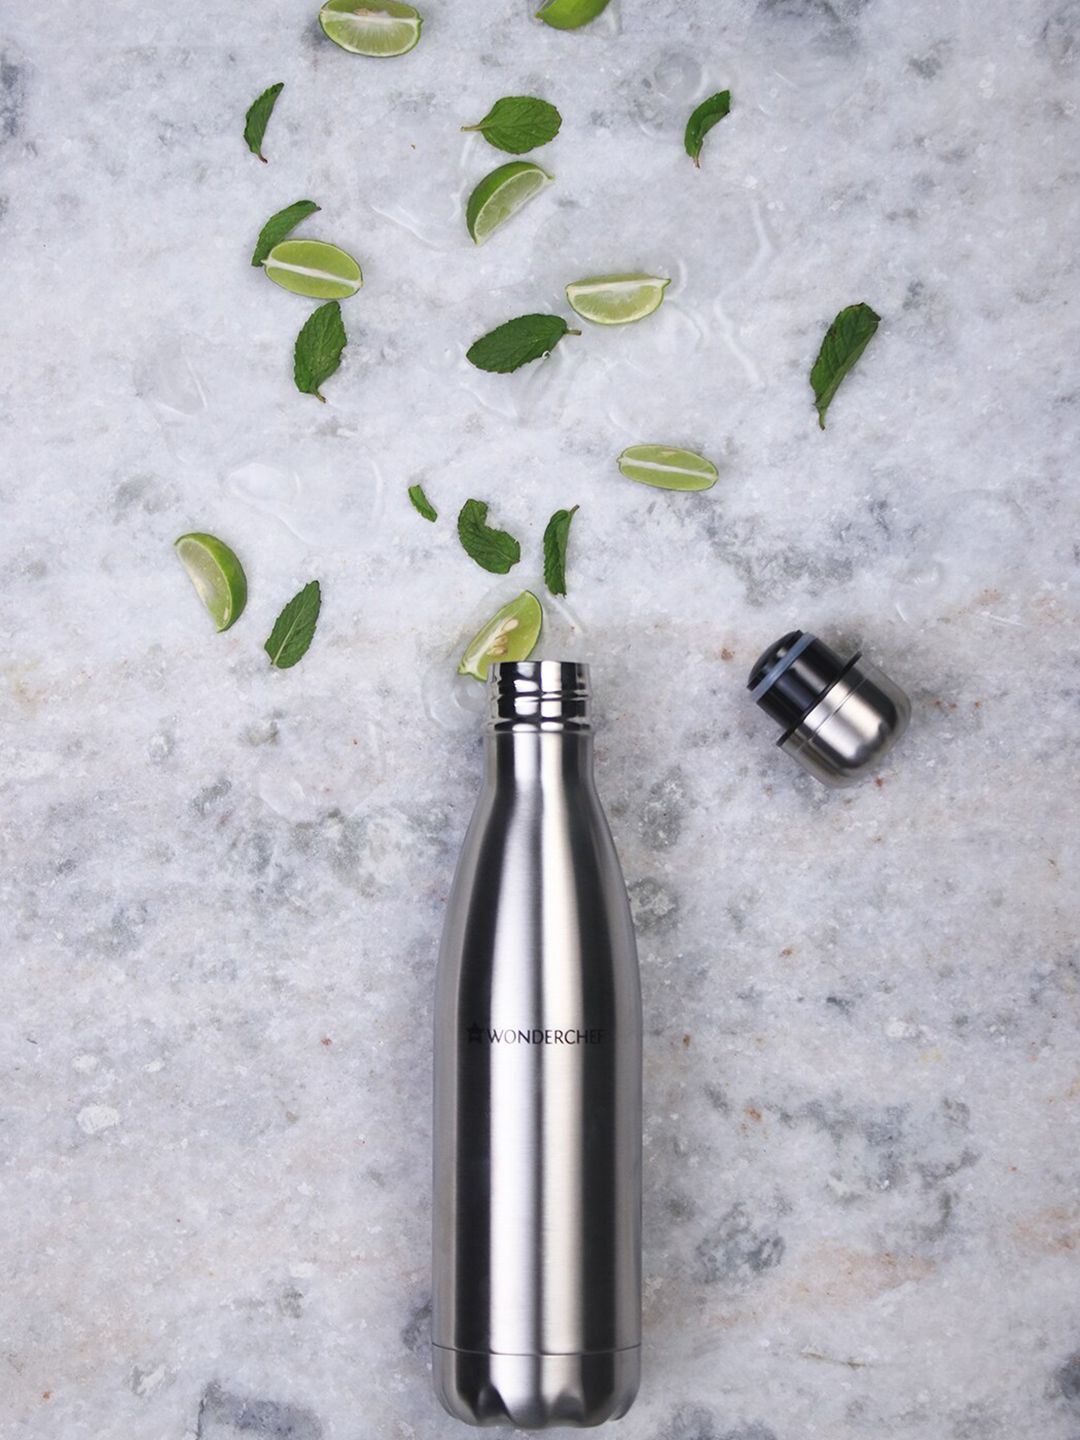 Wonderchef Silver-Toned Water Bottle 1000ml Price in India